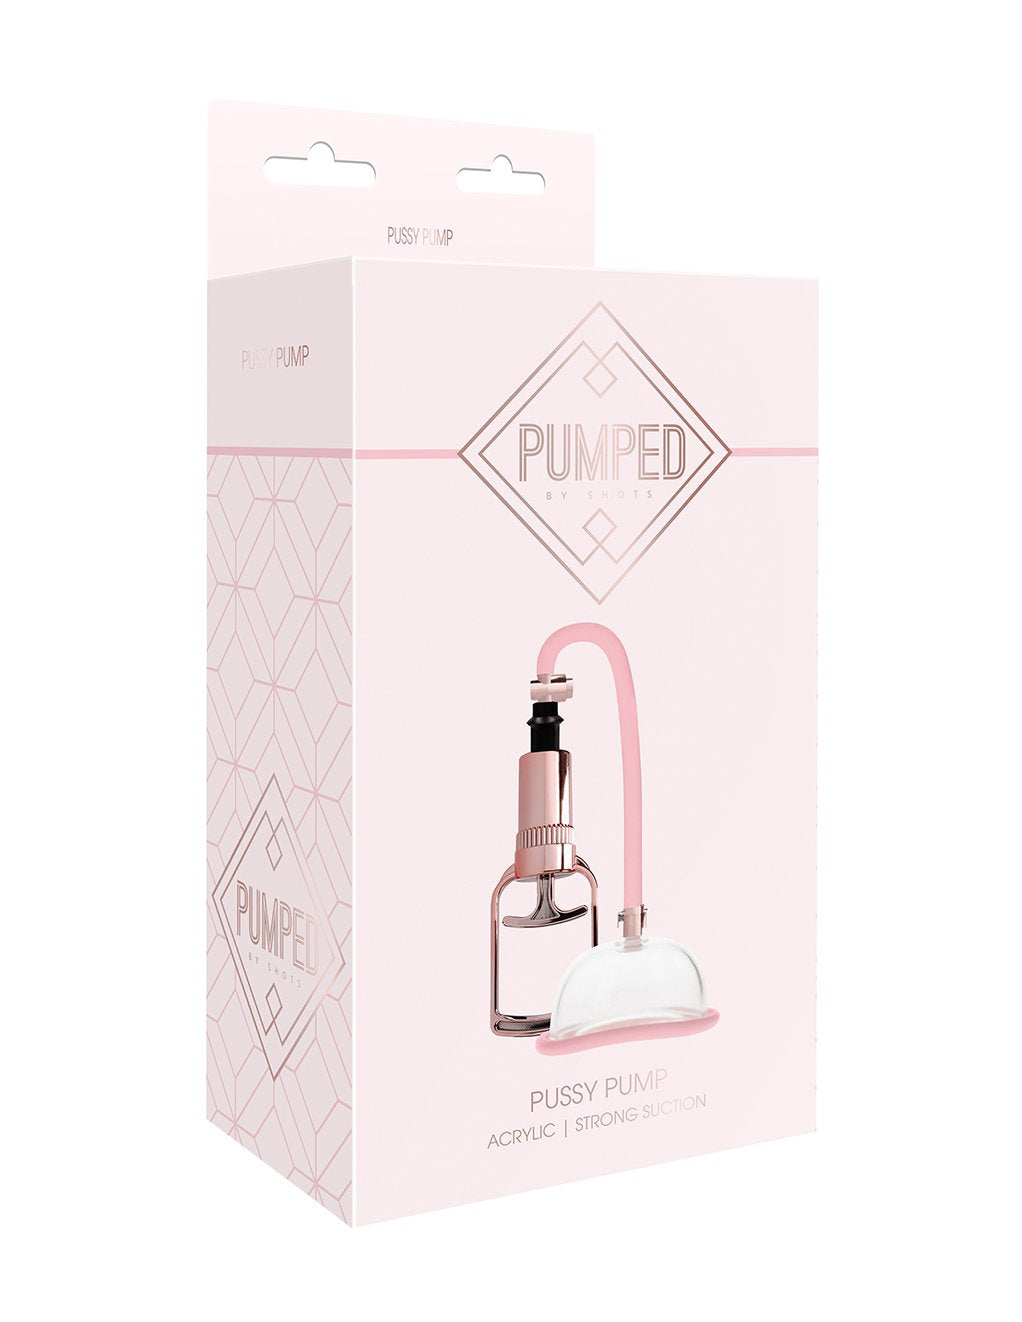 Pumped Rose Gold Pussy Pump- Front Box